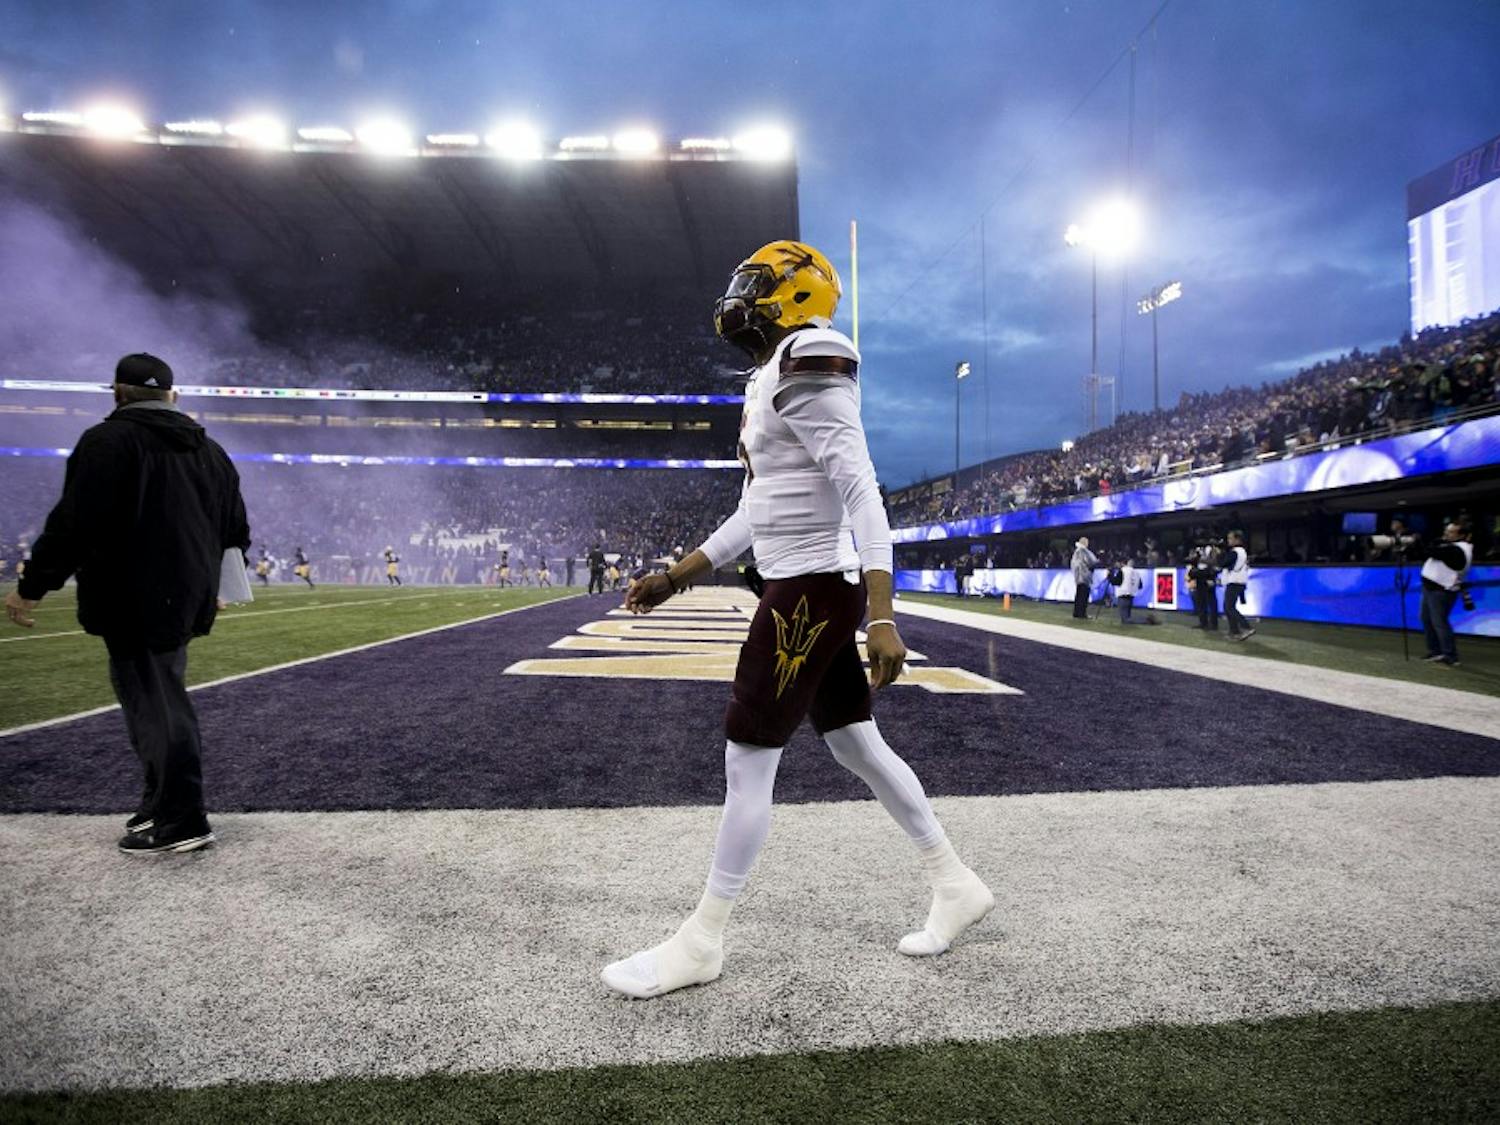 ASU Sun Devils quarterback Manny Wilkins (5) takes the field before a football game against the UW Huskies on Saturday, Nov. 19, 2016, in Husky Stadium in Seattle, Washington. 